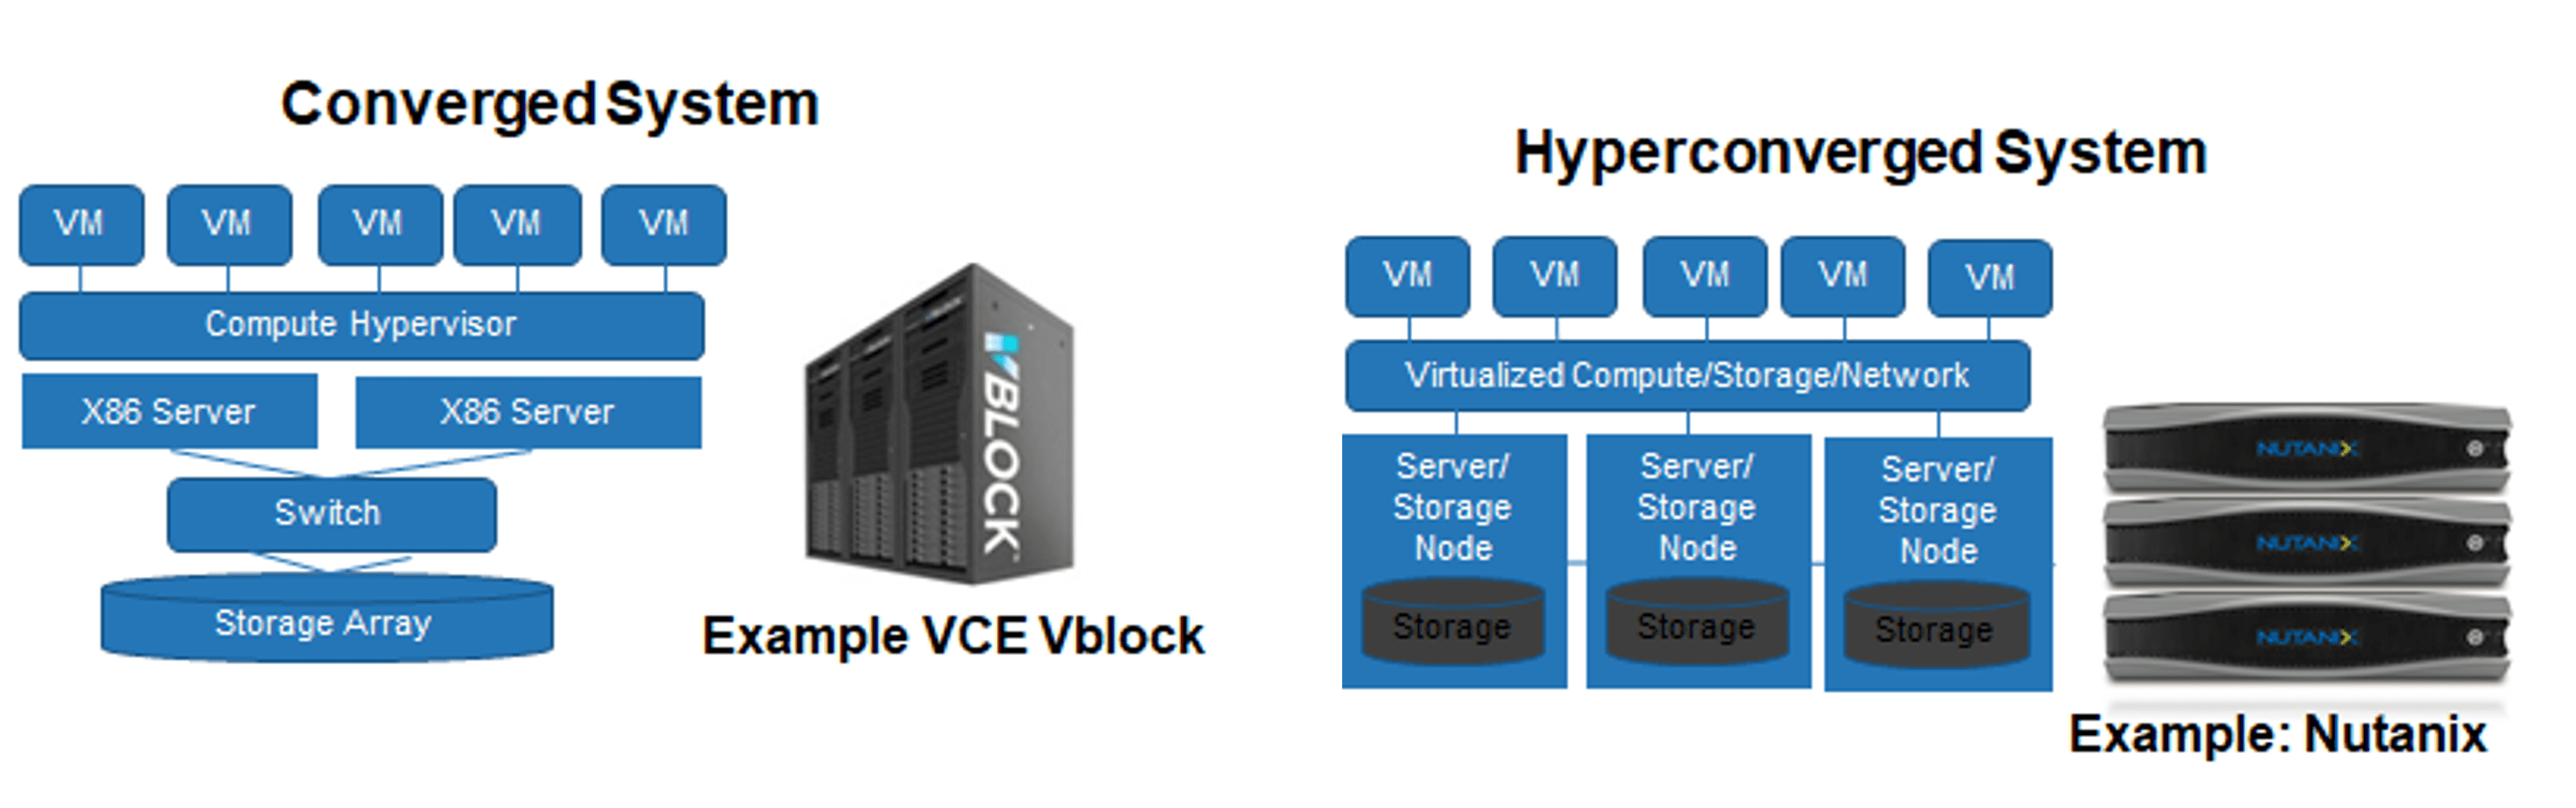 A comparison between converged and hyperconverged systems.